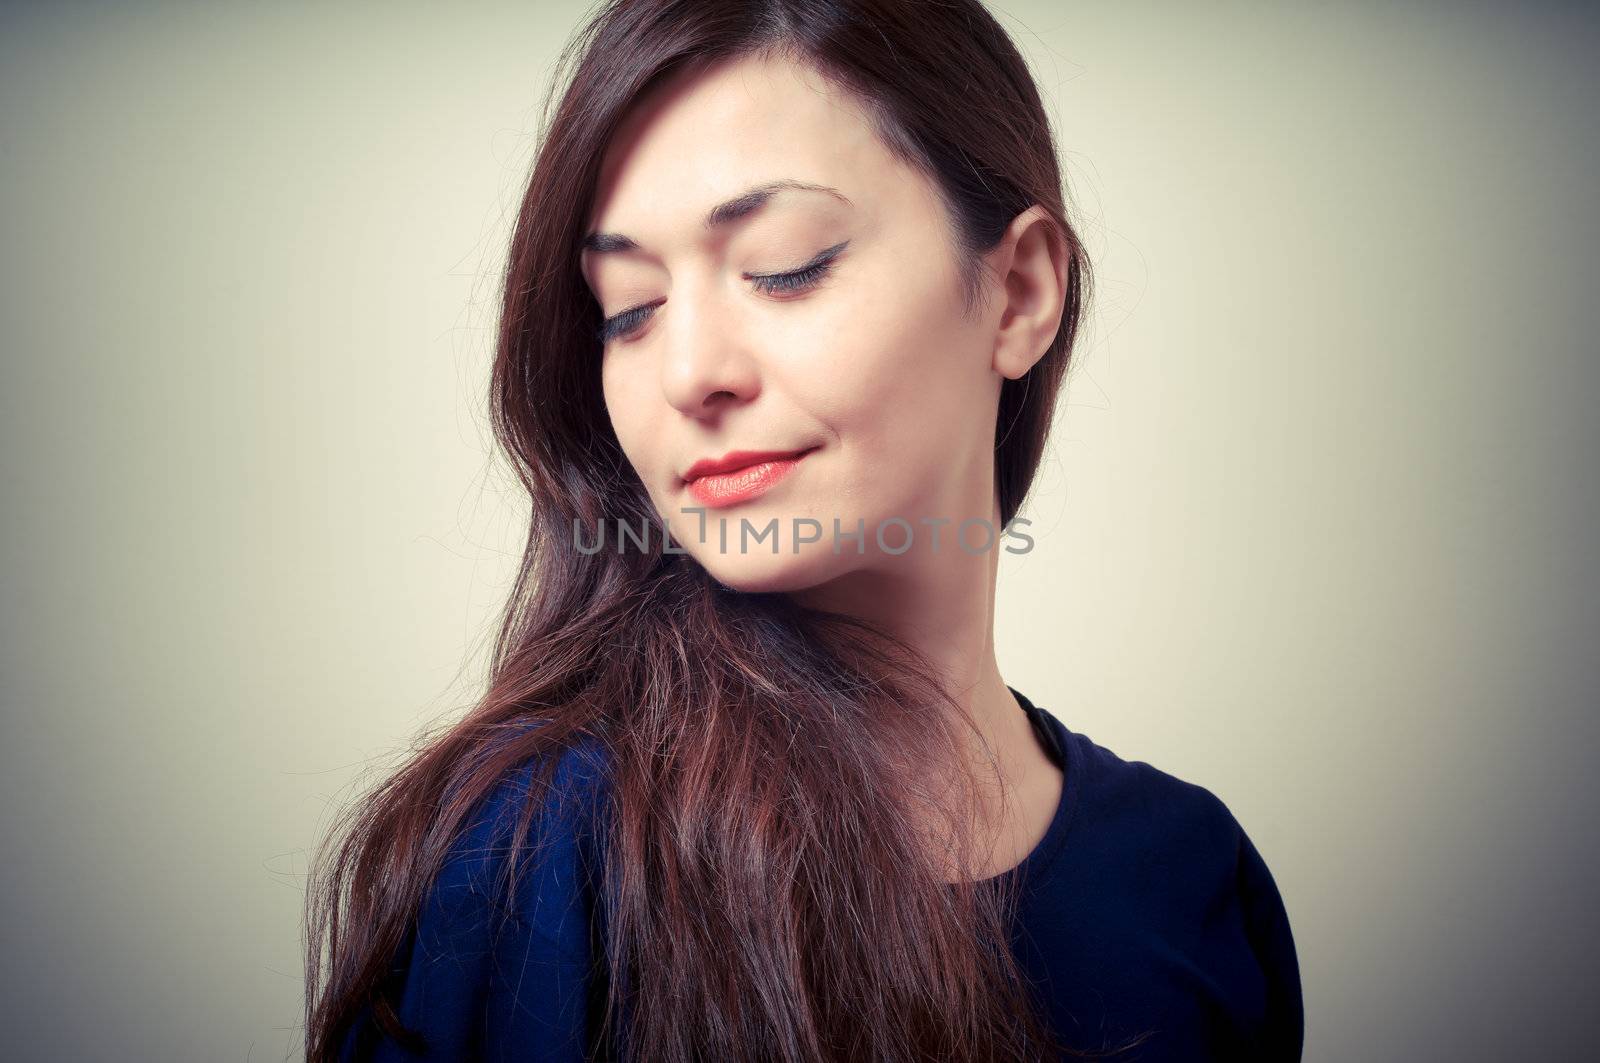 portrait of beautiful girl with long hair and blue sweater on gray background